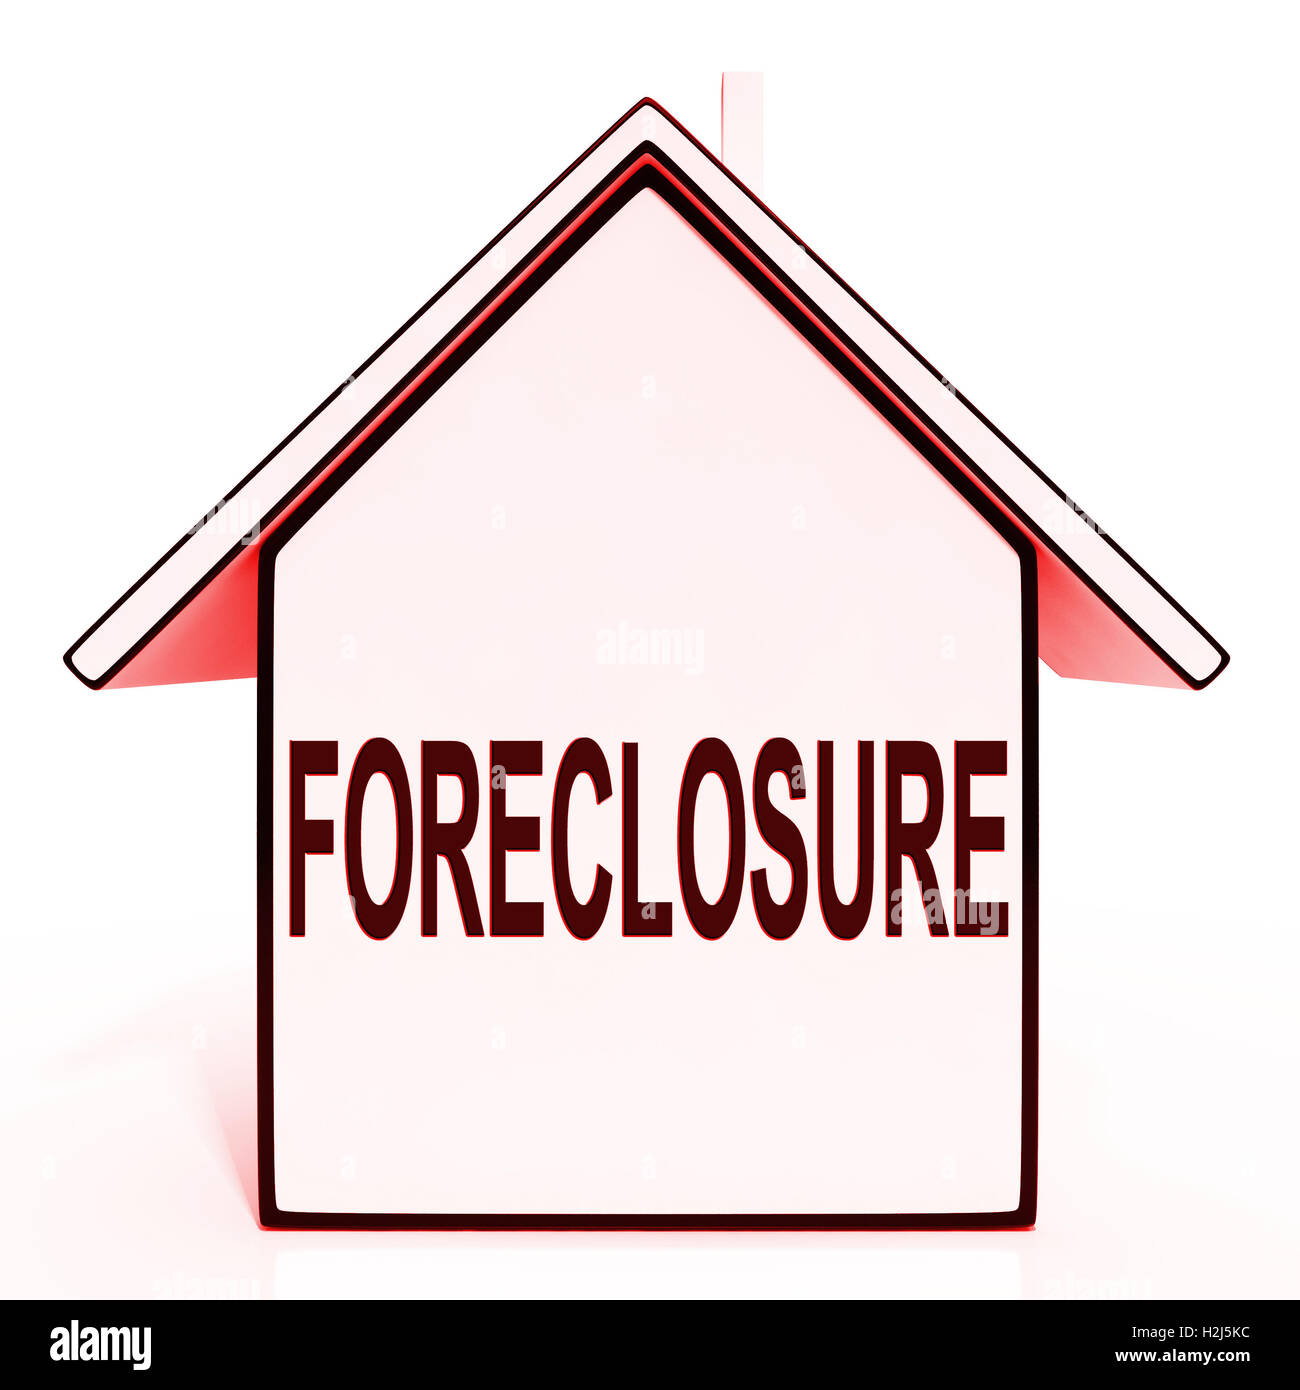 Foreclosure House Means Repossession To Recover Debt Stock Photo